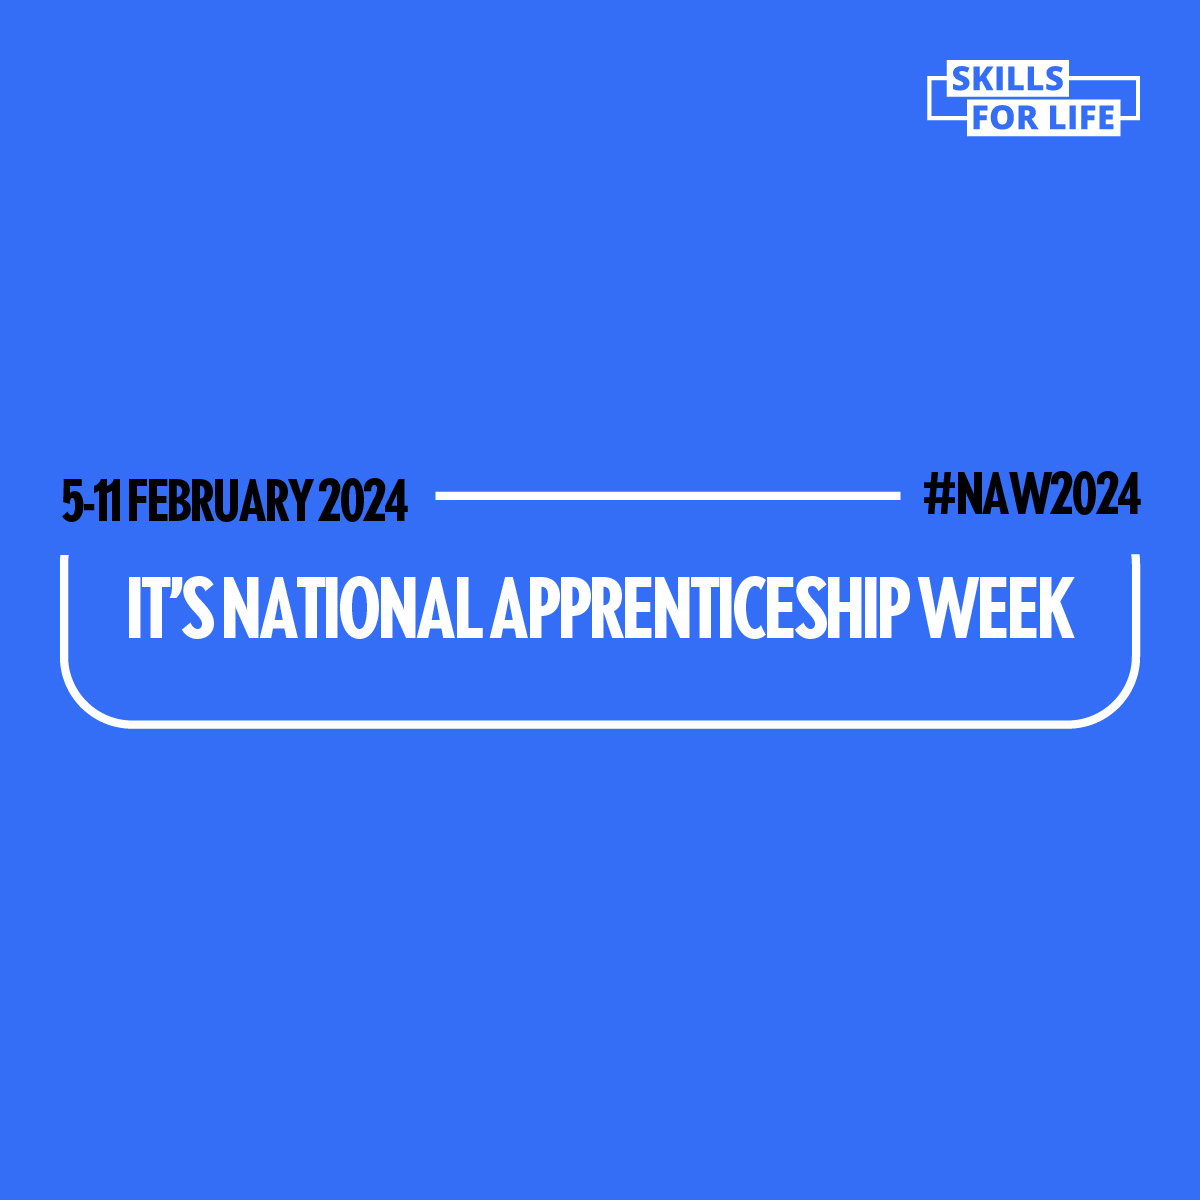 It’s National Apprenticeship Week! So we're celebrating apprenticeships & the opportunities they bring. Many merchants & suppliers offer apprenticeships to help people develop their skills. Read about our Build A Career Without Limits campaign -wcobm.co.uk/about/build-yo…. #NAW2024